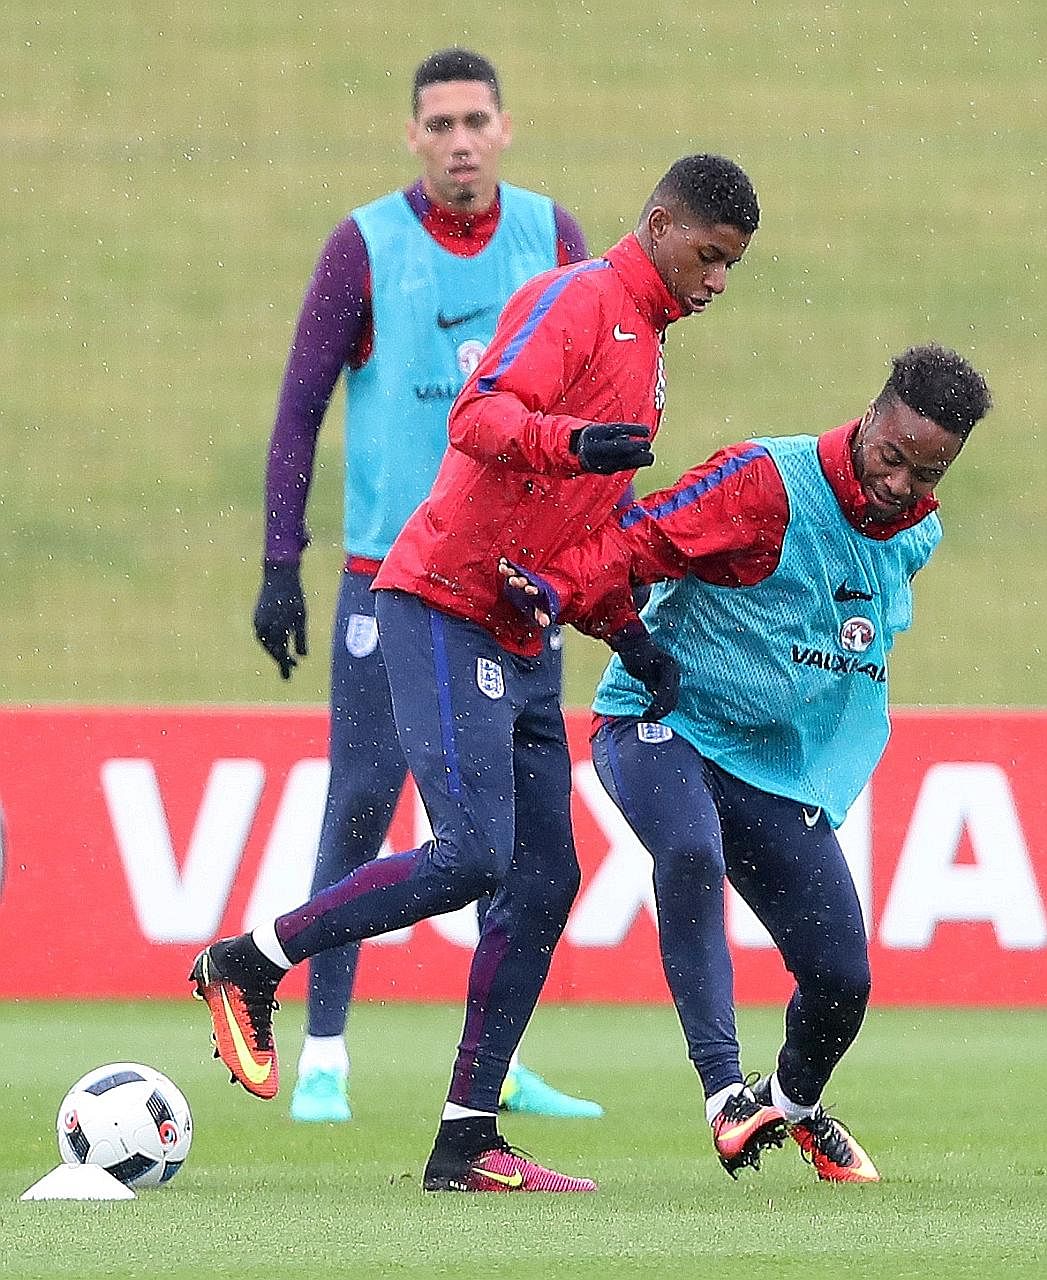 Marcus Rashford (centre) keeping the ball away from Raheem Sterling during England's training session as Chris Smalling watches on.